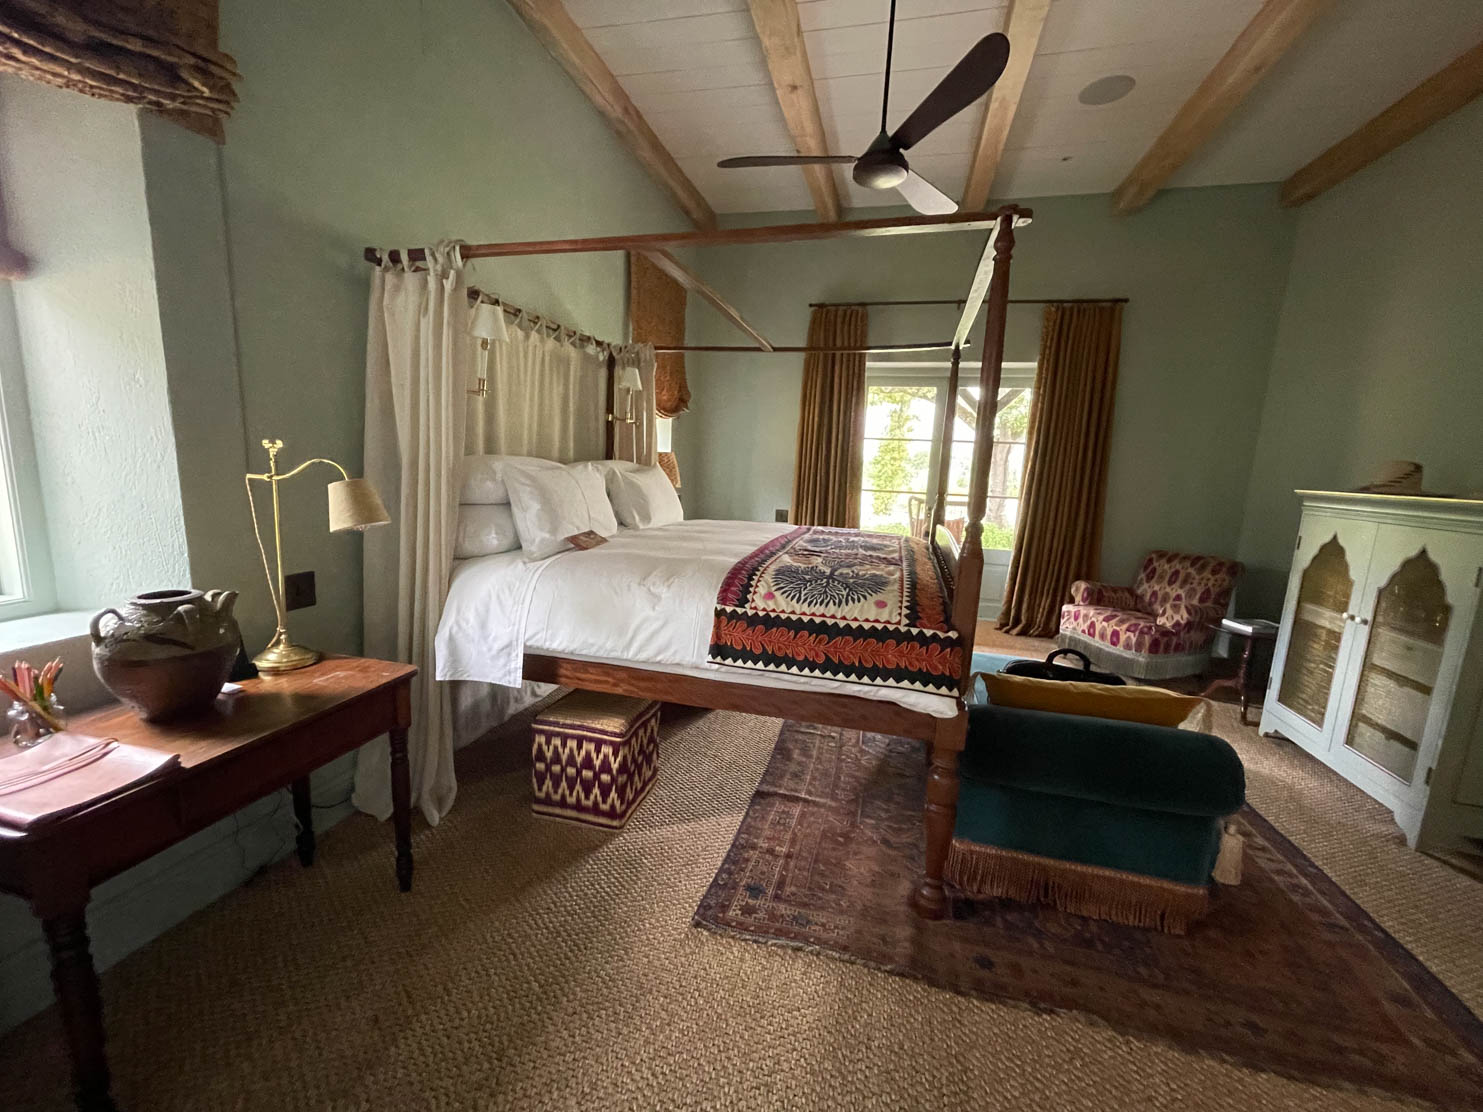 Sterrekopje Farm Love the Kenyan high beds, which are the centerpiece of each bedroom. The beds are above average high and are accessed by the cube step on both sides of the bed. Our suite is filled with modern amenities and luxuries, but at the same time, looking vintage and bygone